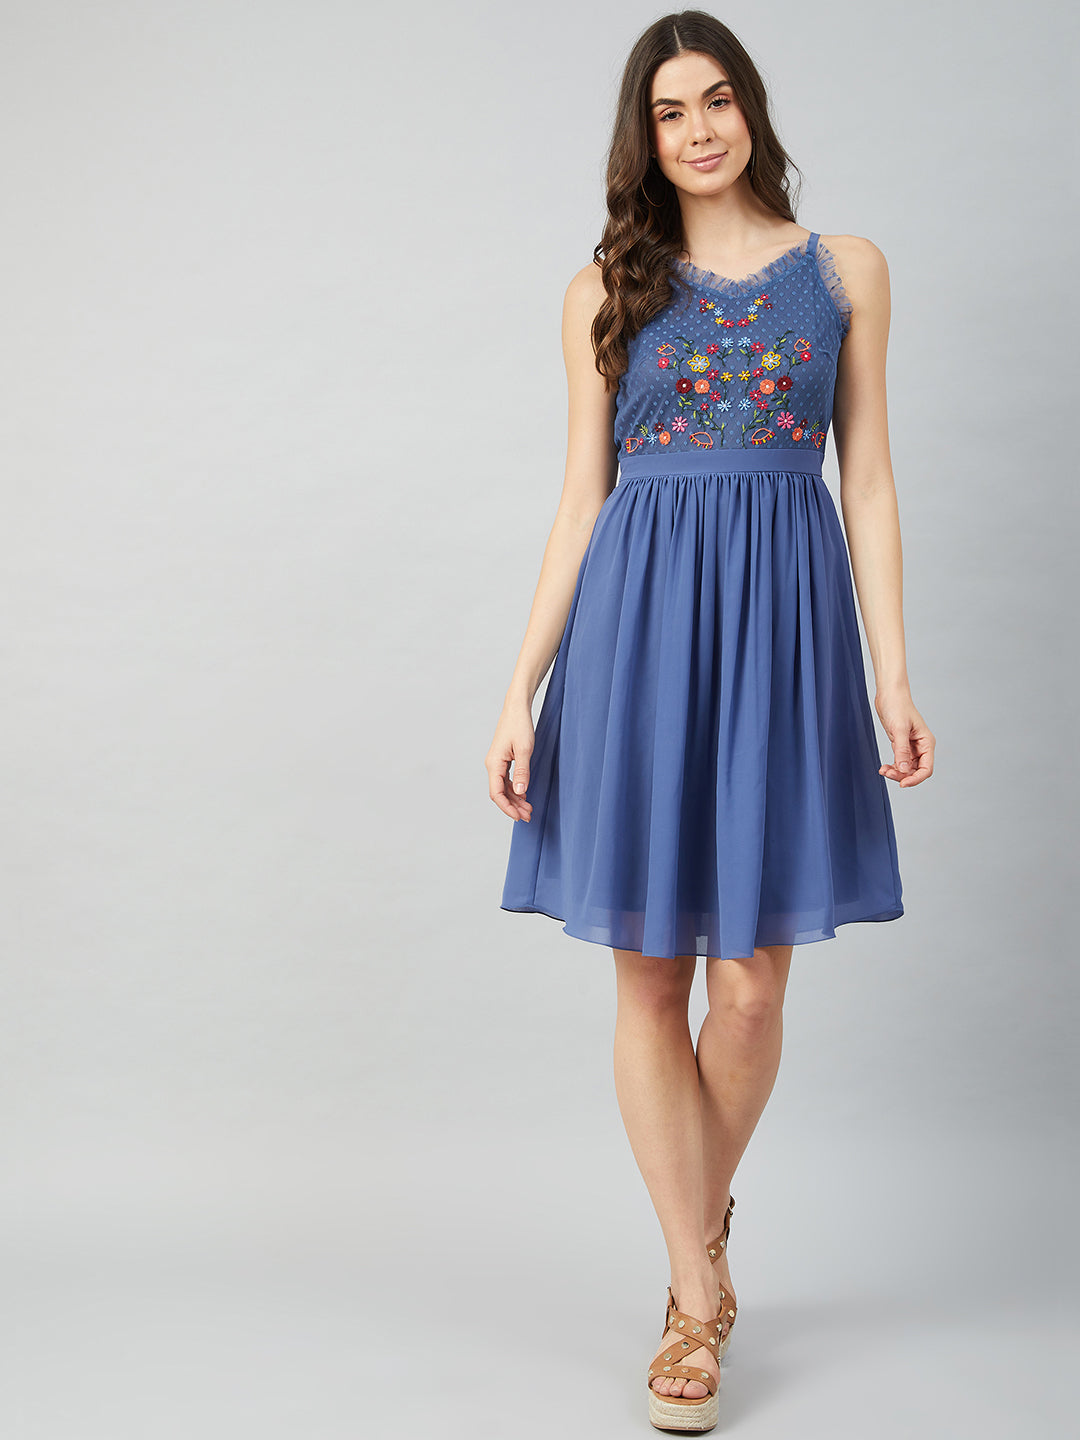 Athena Women Blue Floral Embroidered Shoulder Straps Georgette Fit and Flare Dress - Athena Lifestyle